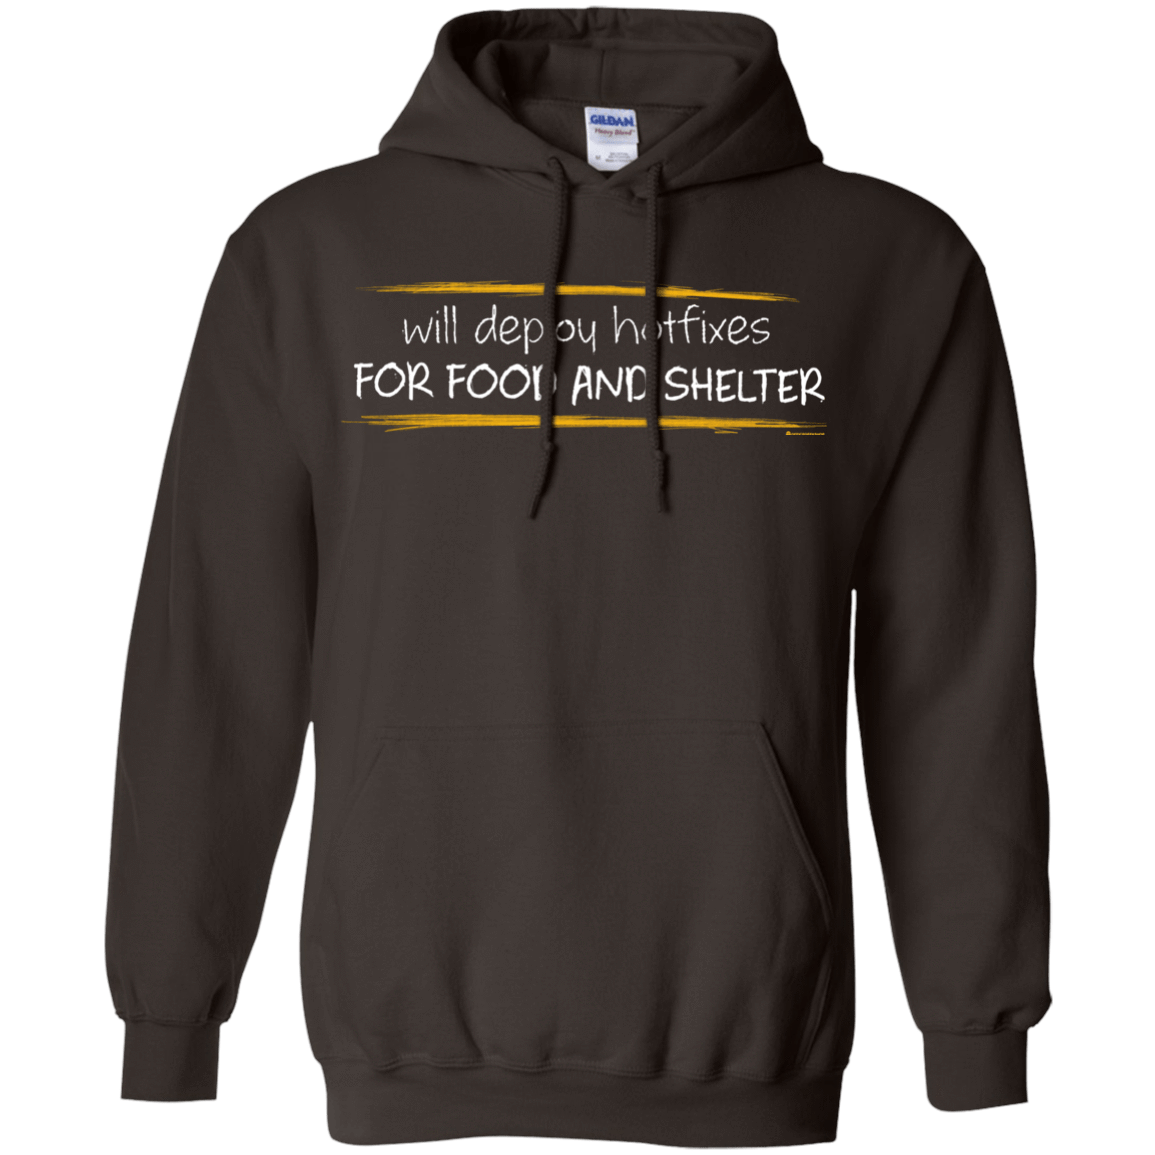 Sweatshirts Dark Chocolate / Small Deploying Hotfixes For Food And Shelter Pullover Hoodie